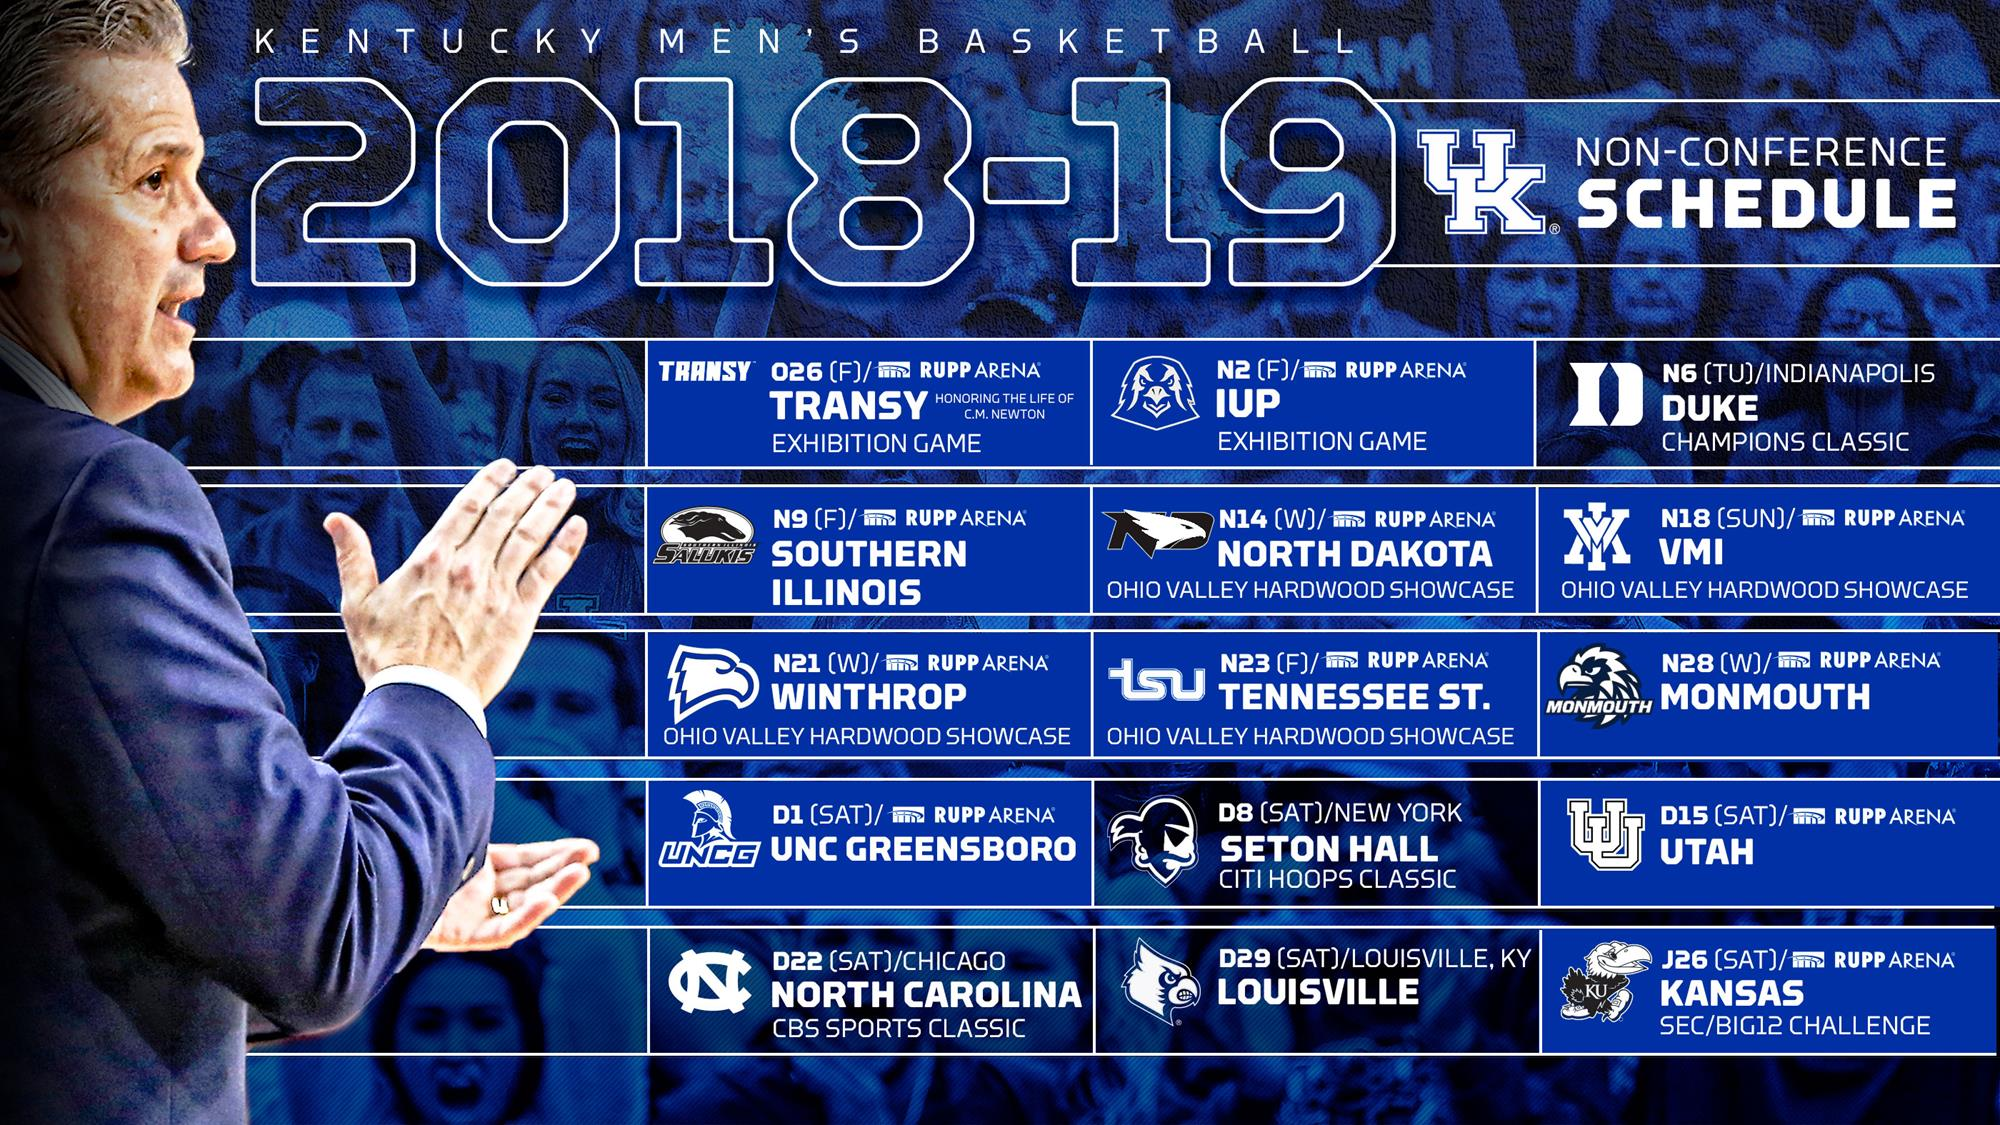 UK Men’s Basketball Completes 2018-19 Nonconference Schedule